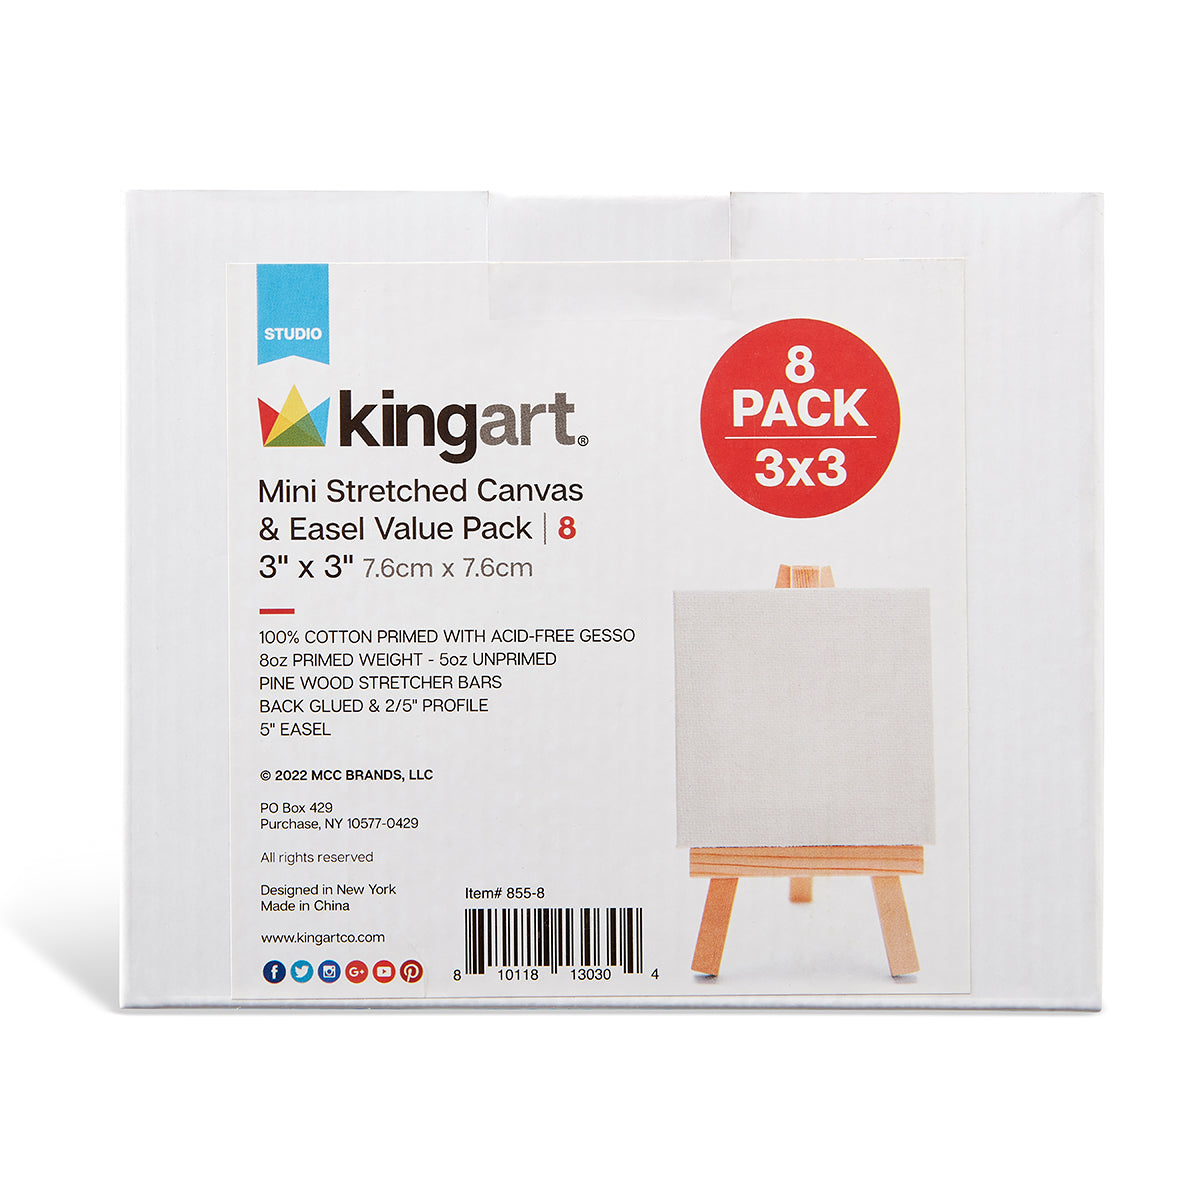 Kingart 825-14 White 10 x 10 Artist Canvas Boards, Value Pack of 14 Square Panels, Gesso Primed - 100% Cotton, Art Supplies for Oil and Acrylic